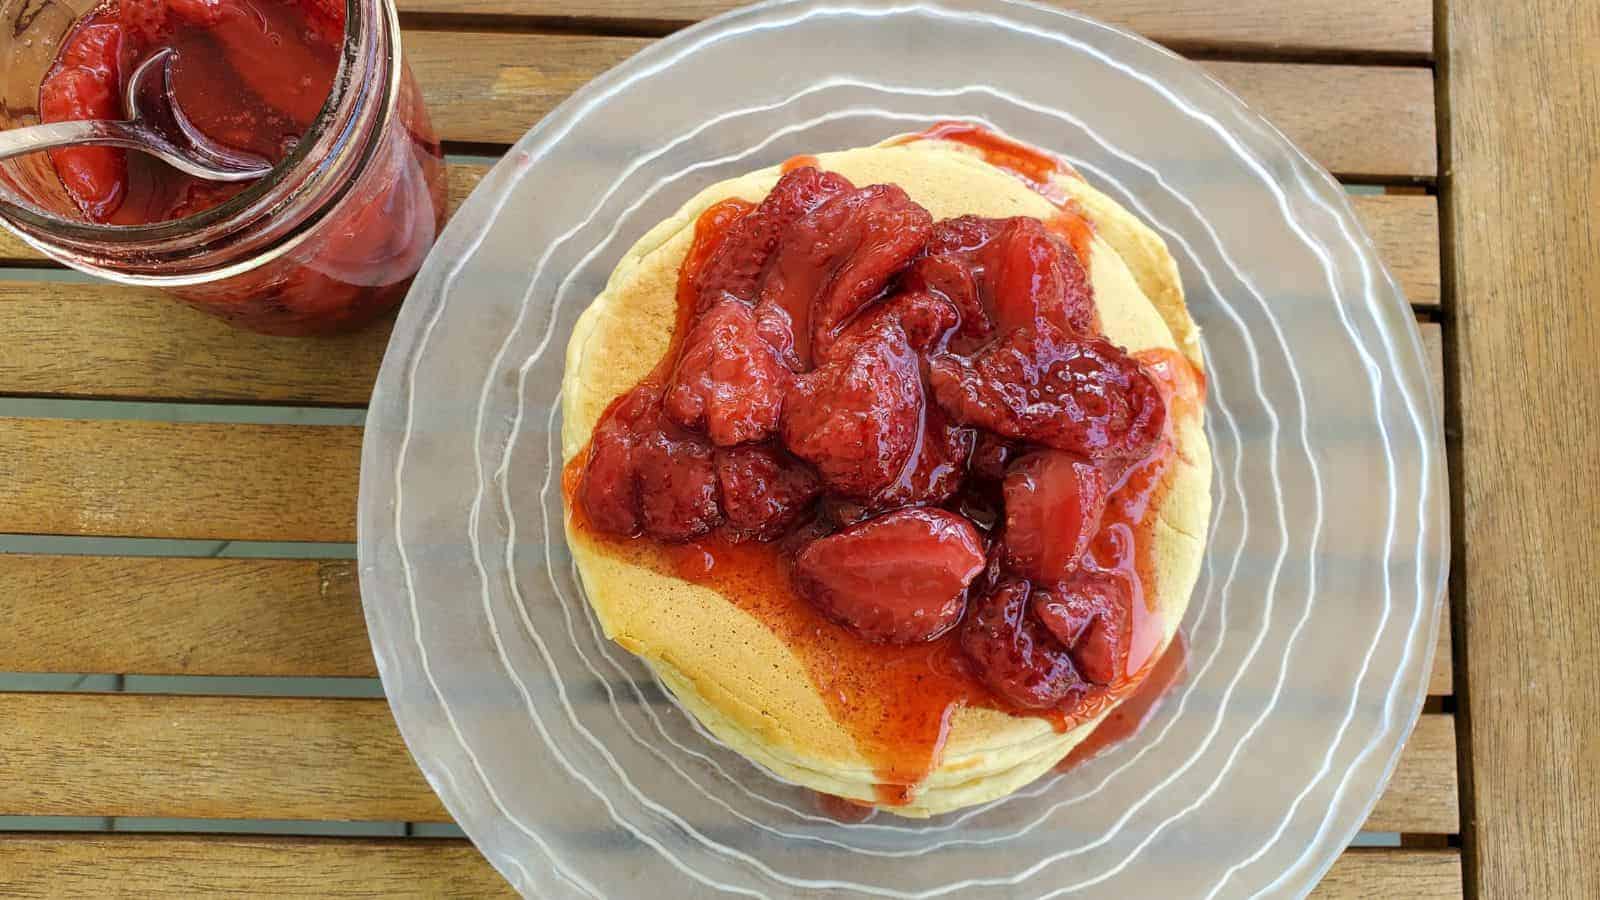 Image shows an overhead shot of Sourdough Pancakes on a plate with strawberry syrup dousing them.